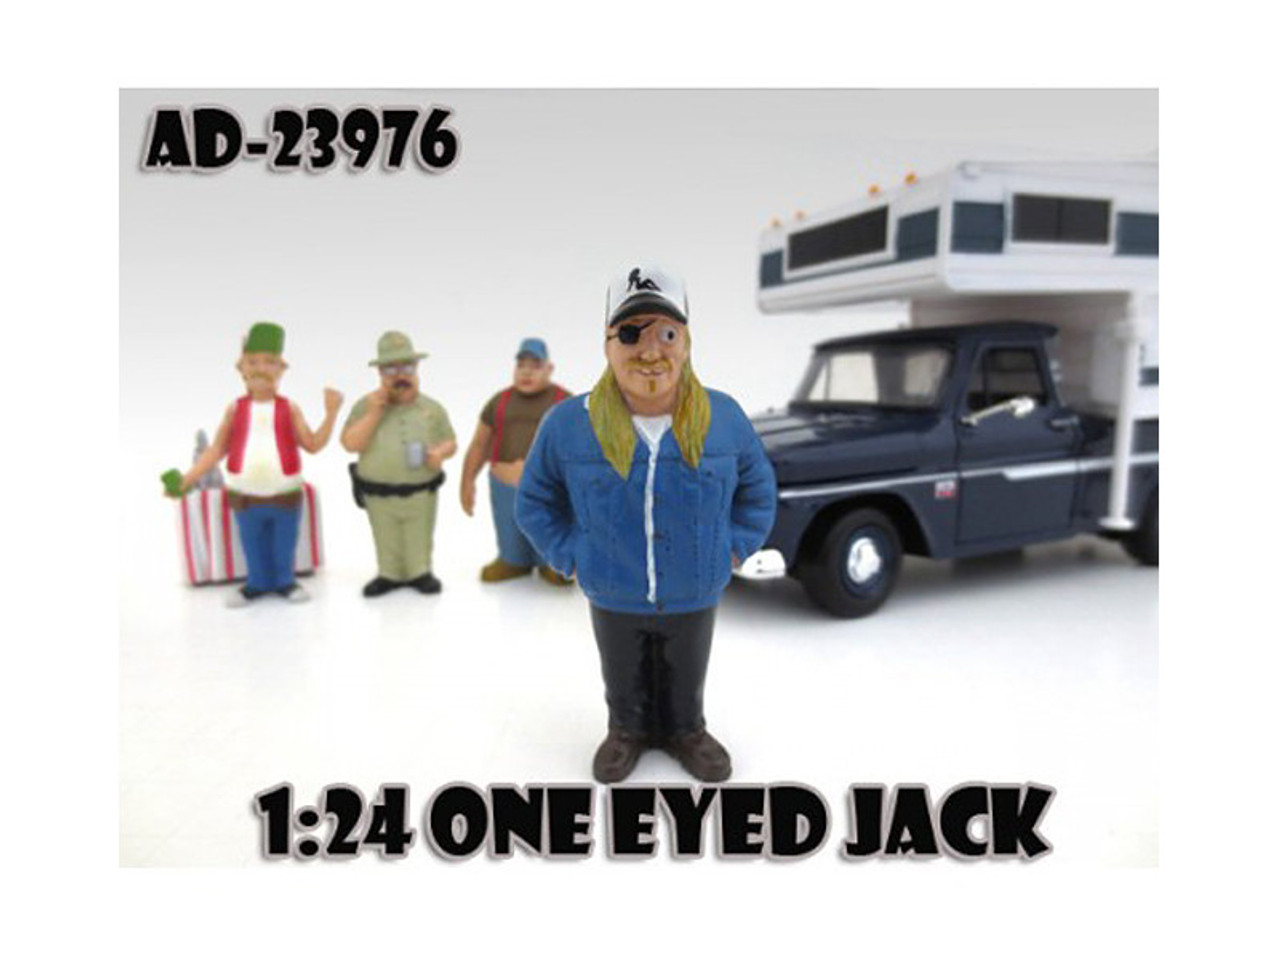 One Eyed Jack "Trailer Park" Figure For 1/24 Diecast Model Cars by American Diorama